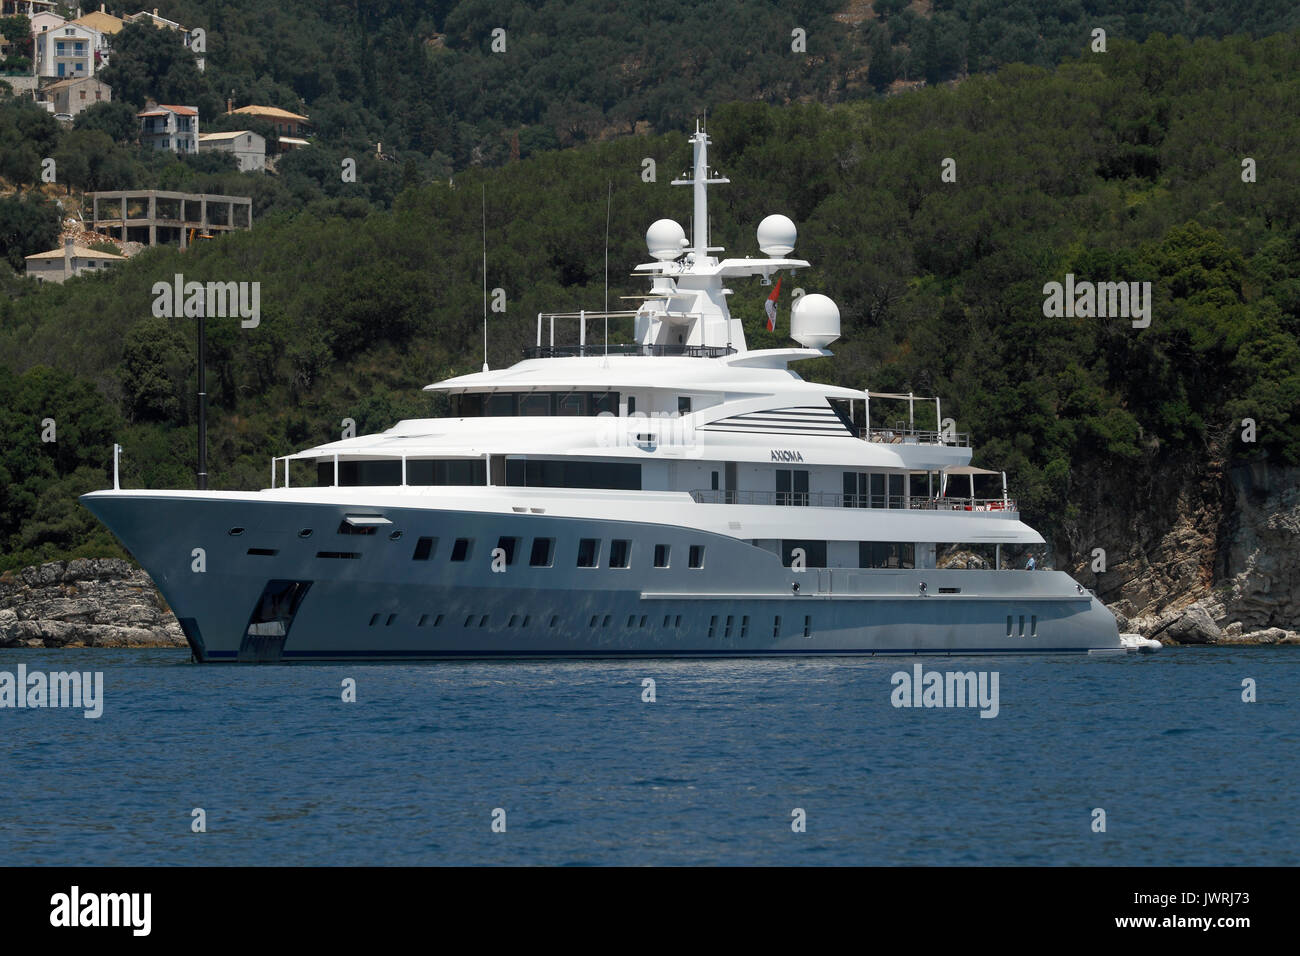 Super yacht Axioma, Corfu The 236.22ft /72m custom motor yacht 'AXIOMA' was  built in 2013 by Dunya Yachts. Originally known as project Red Square, her  Stock Photo - Alamy